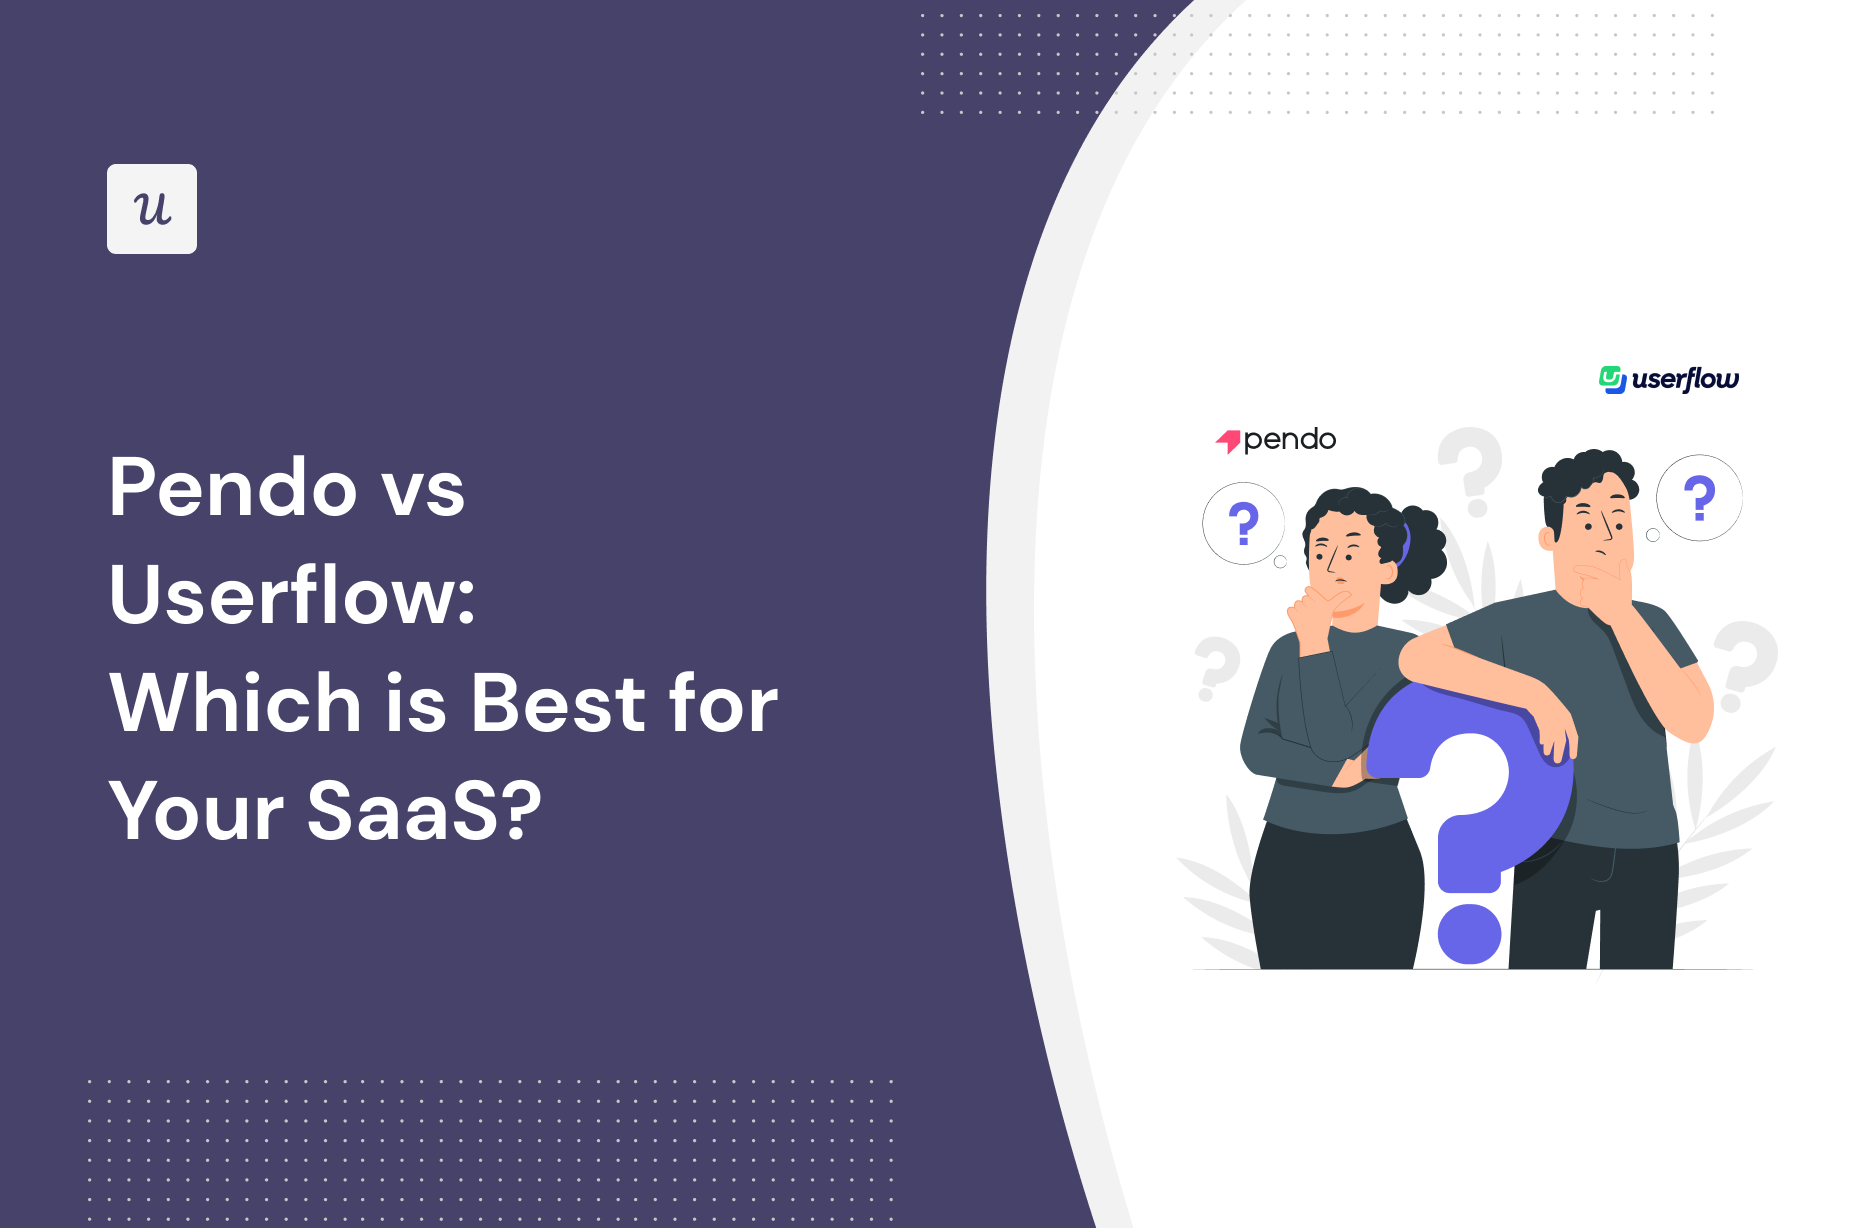 Pendo vs Userflow: Which is Best for Your SaaS?